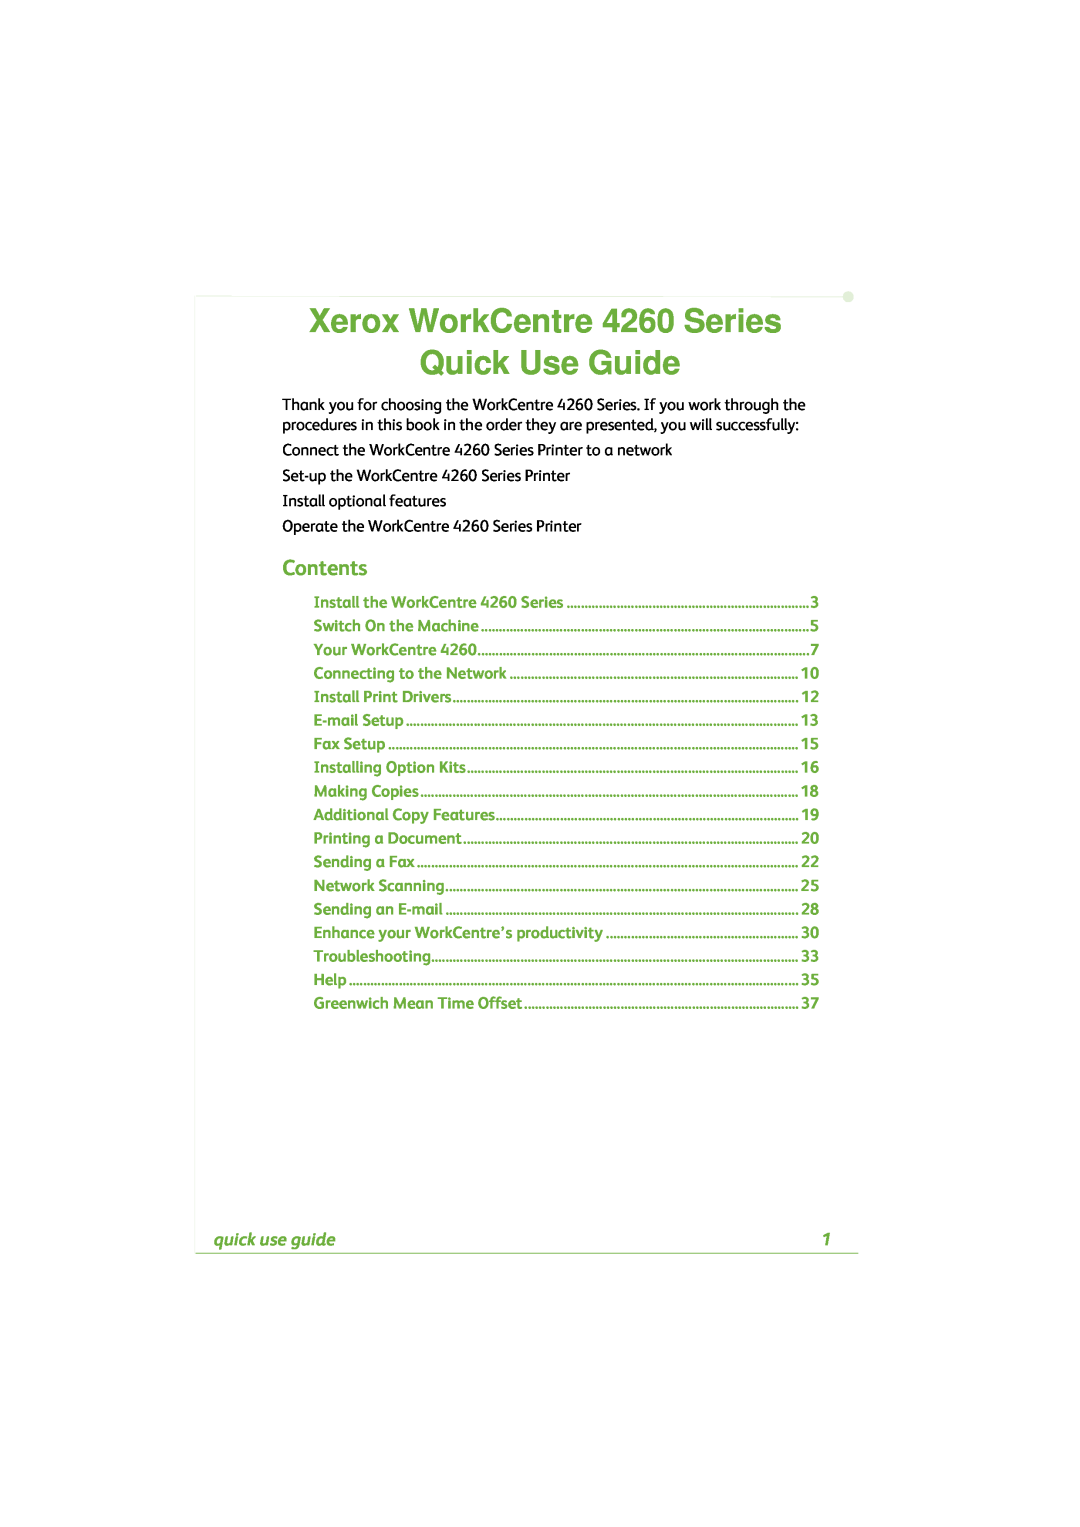 Xerox 4260C manual Xerox WorkCentre 4260 Series Quick Use Guide, Contents, quick use guide 